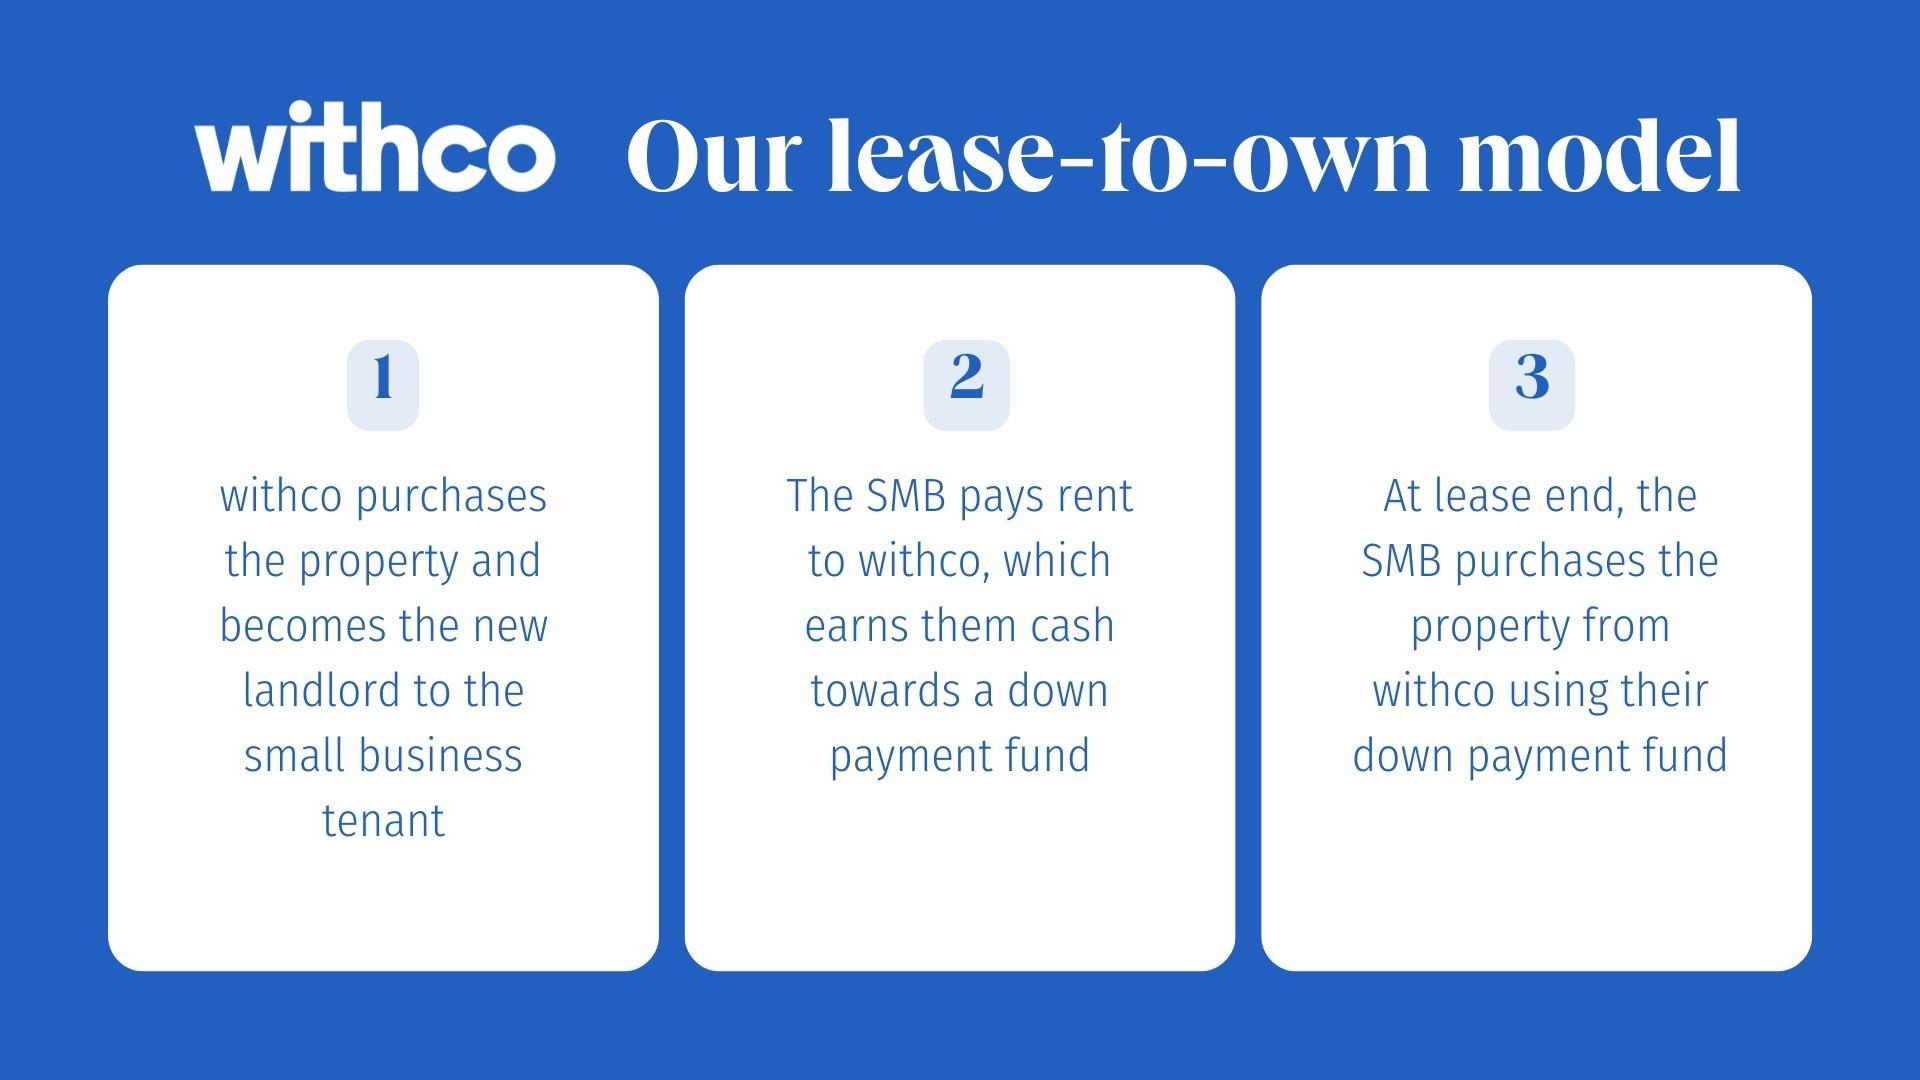 https://with.co/wp-content/uploads/2022/05/Lease-to-own-partnerships.jpg